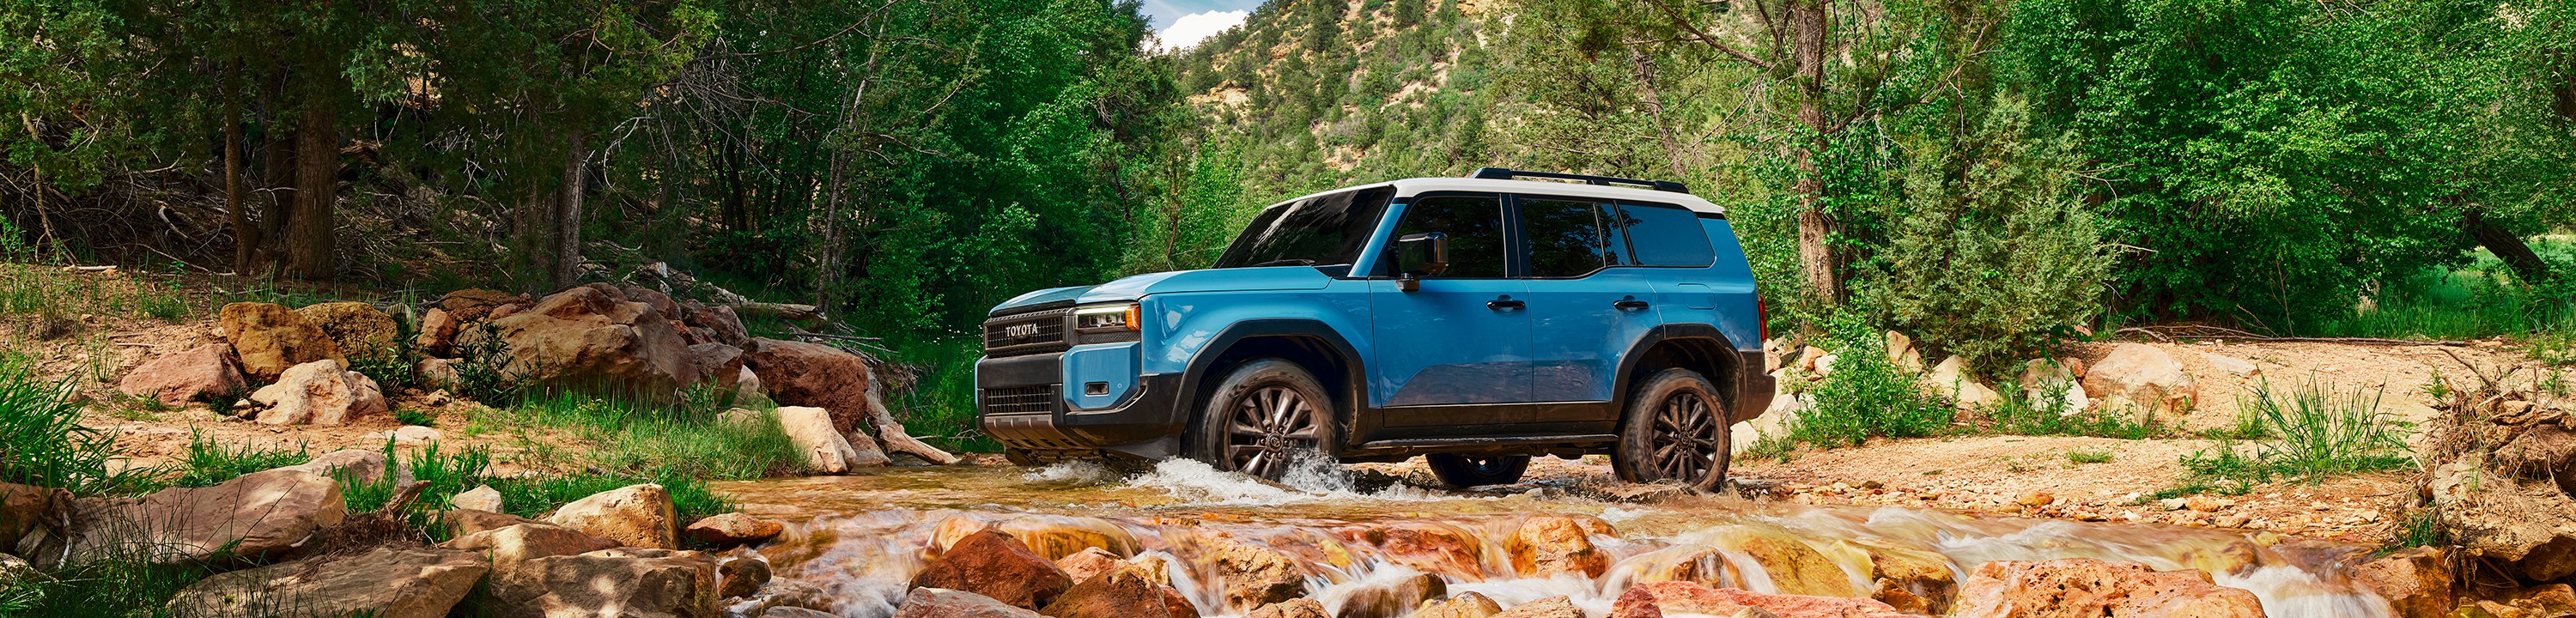 A blue Toyota Land Cruiser with a white roof crosses a creek in a forest valley.